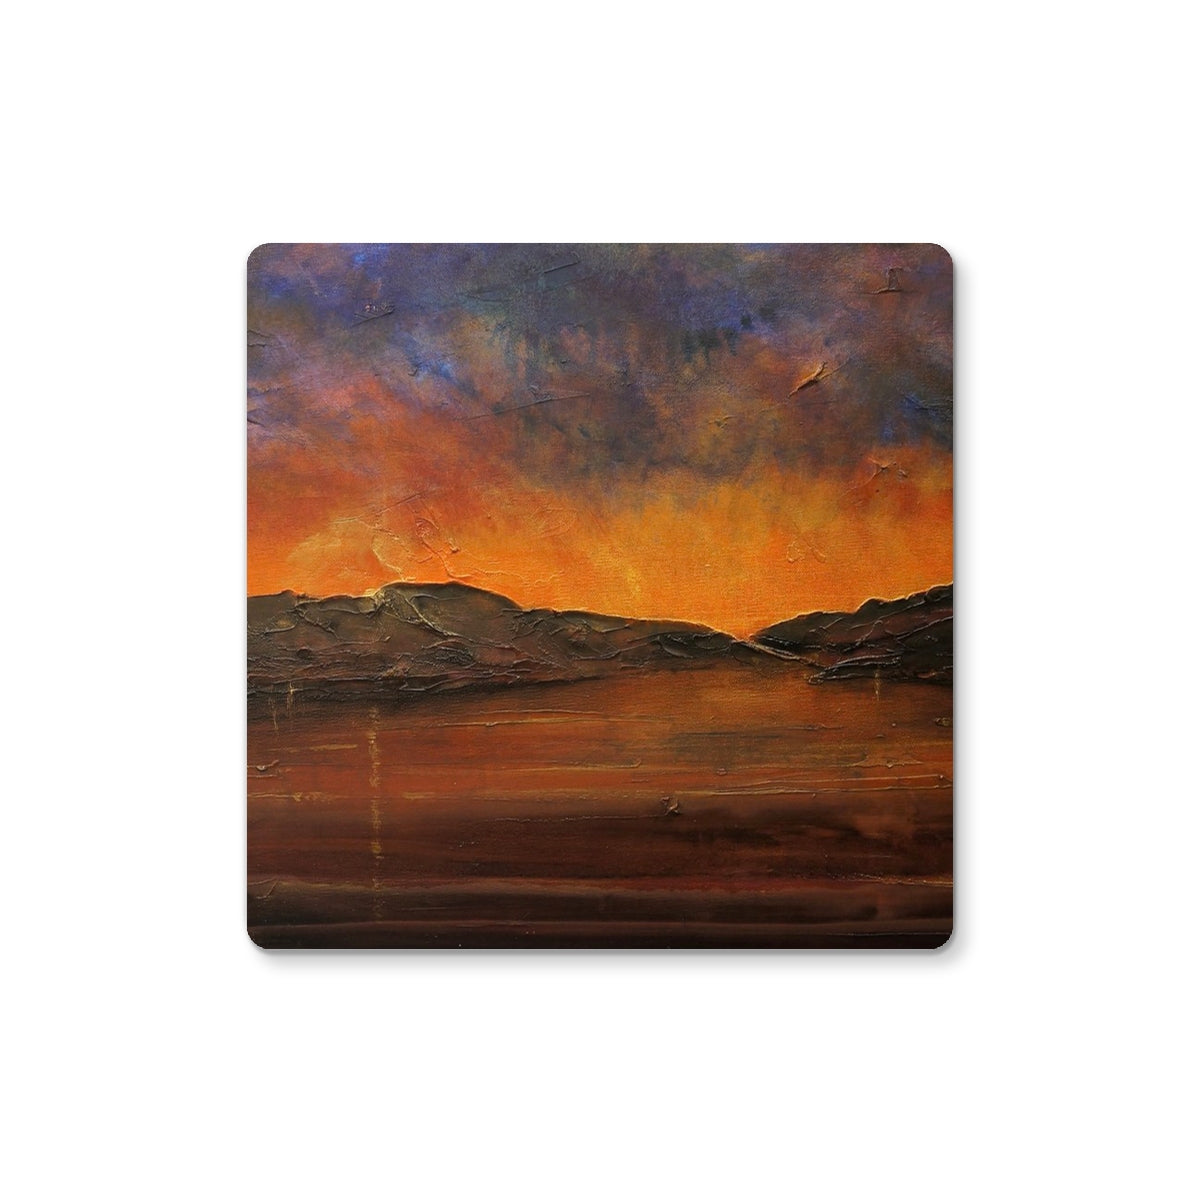 A Brooding Clyde Dusk Art Gifts Coaster-Homeware-River Clyde Art Gallery-Single Coaster-Paintings, Prints, Homeware, Art Gifts From Scotland By Scottish Artist Kevin Hunter